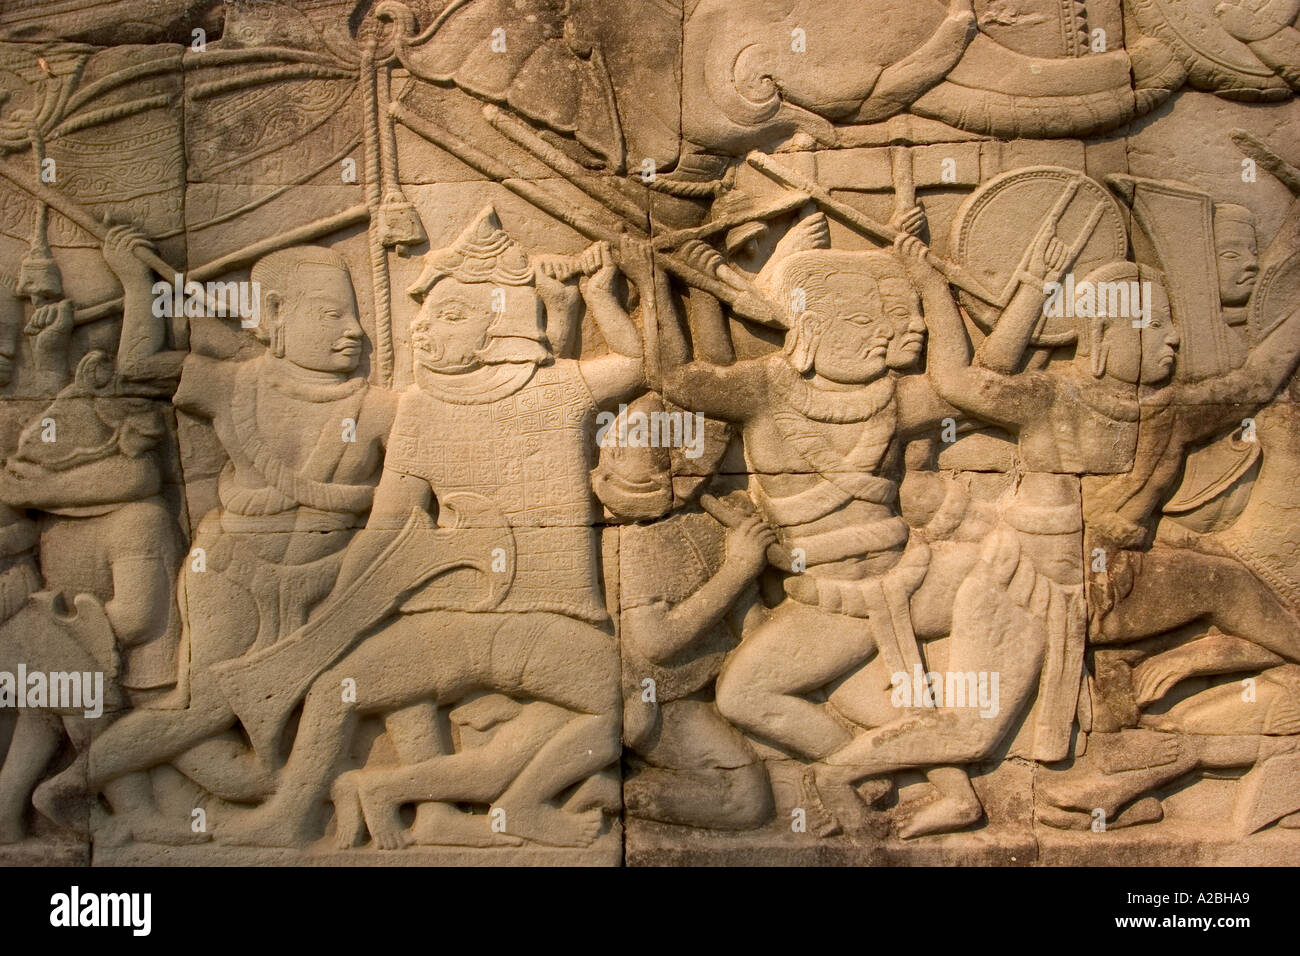 Cambodia Siem Reap Angkor Thom The Bayon bas relief panel showing 1177 Wars when Khmers were defeated Angkor pillaged Stock Photo